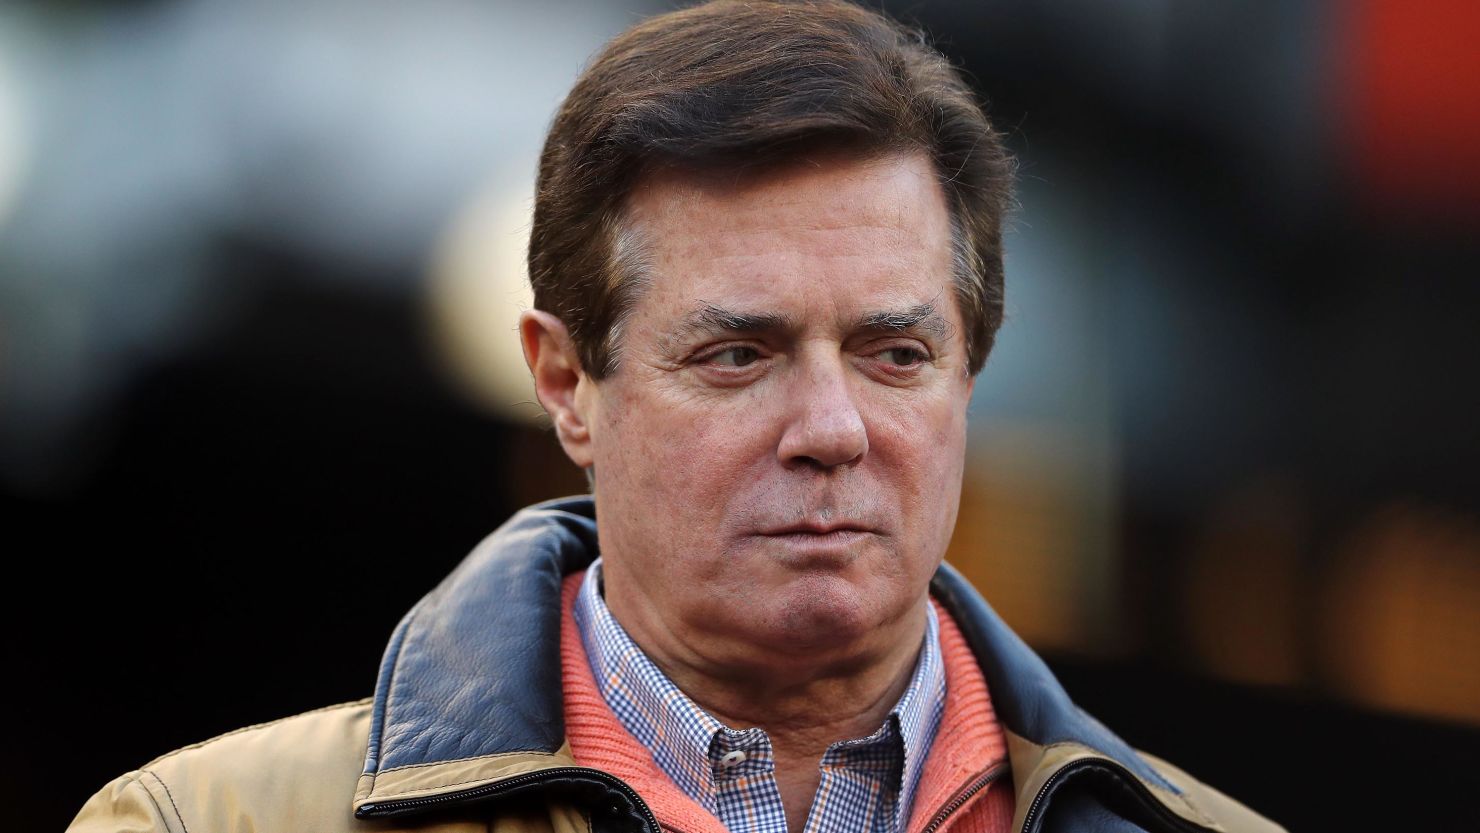 Former Donald Trump presidential campaign manager Paul Manafort looks on during Game Four of the American League Championship Series at Yankee Stadium on October 17, 2017 in the Bronx borough of New York City. 